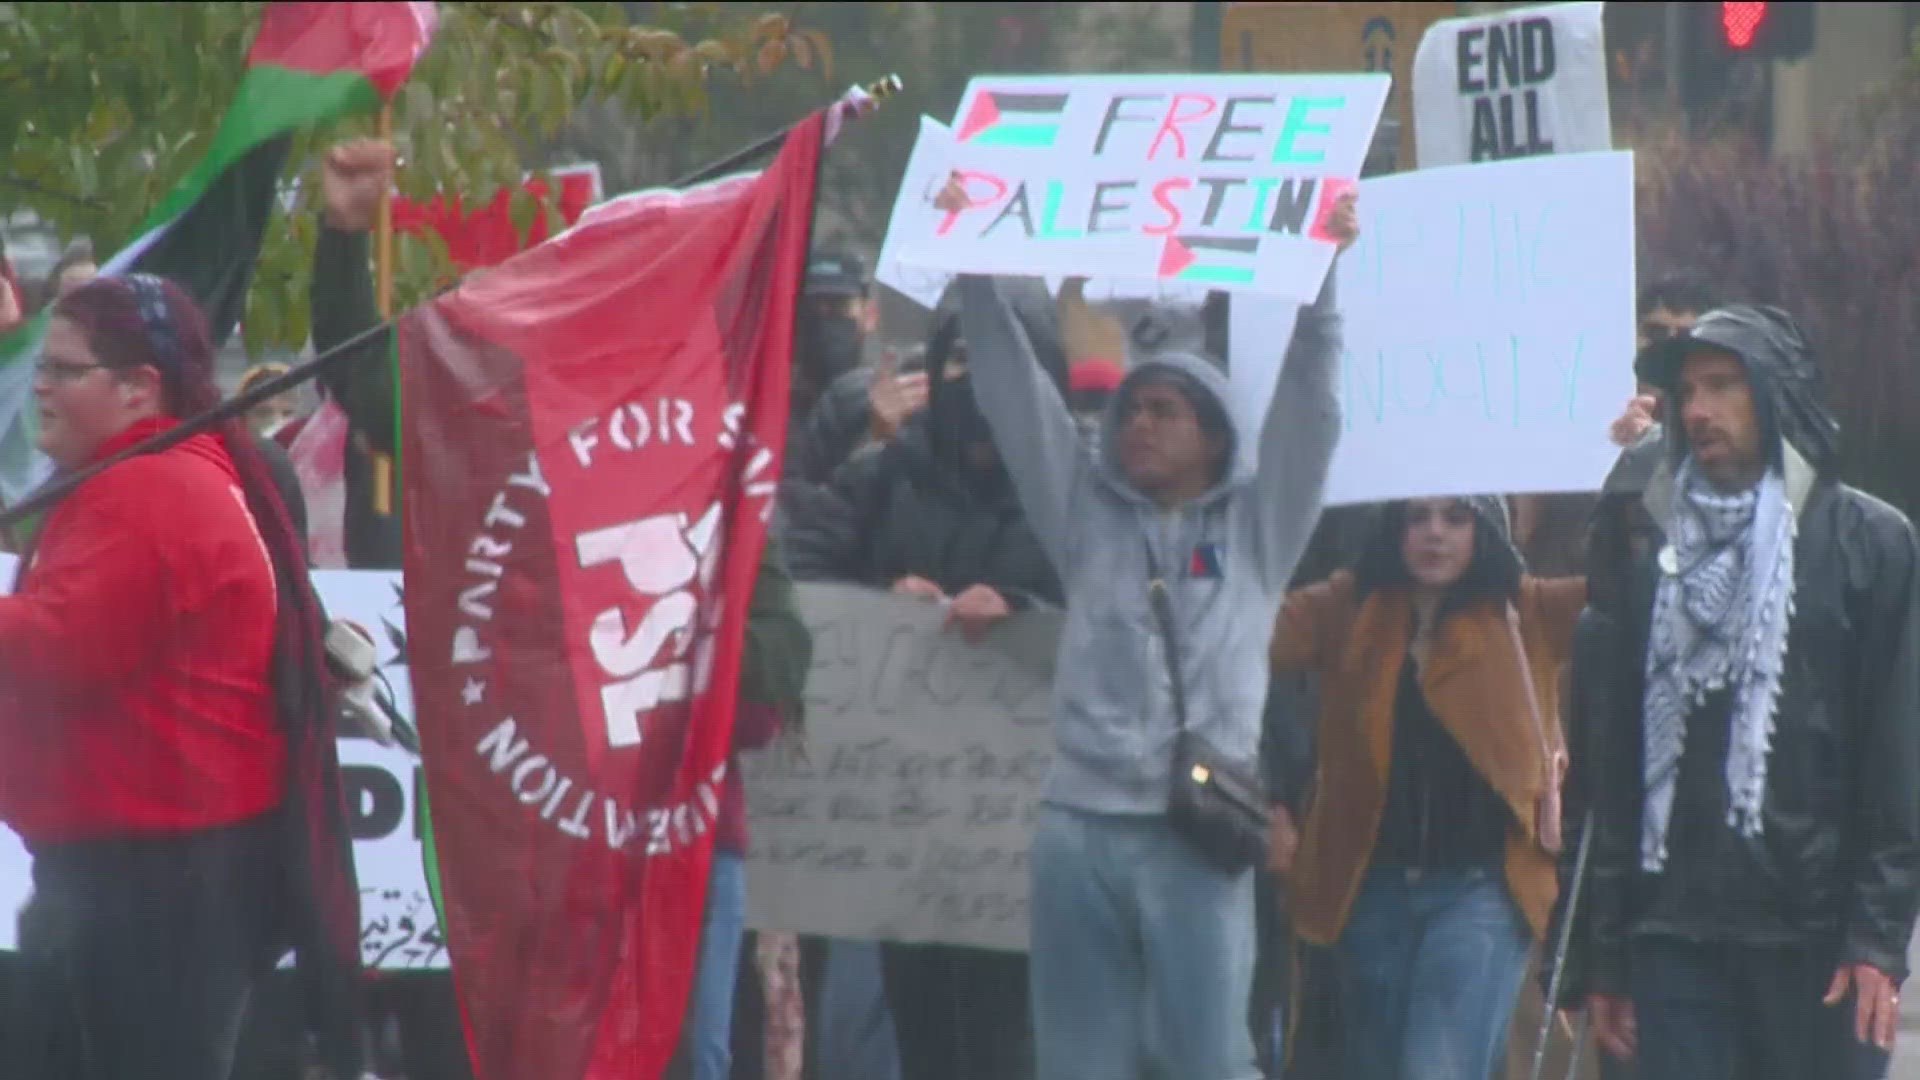 The rally, organized by Boise to Palestine, had several hundred protesters.